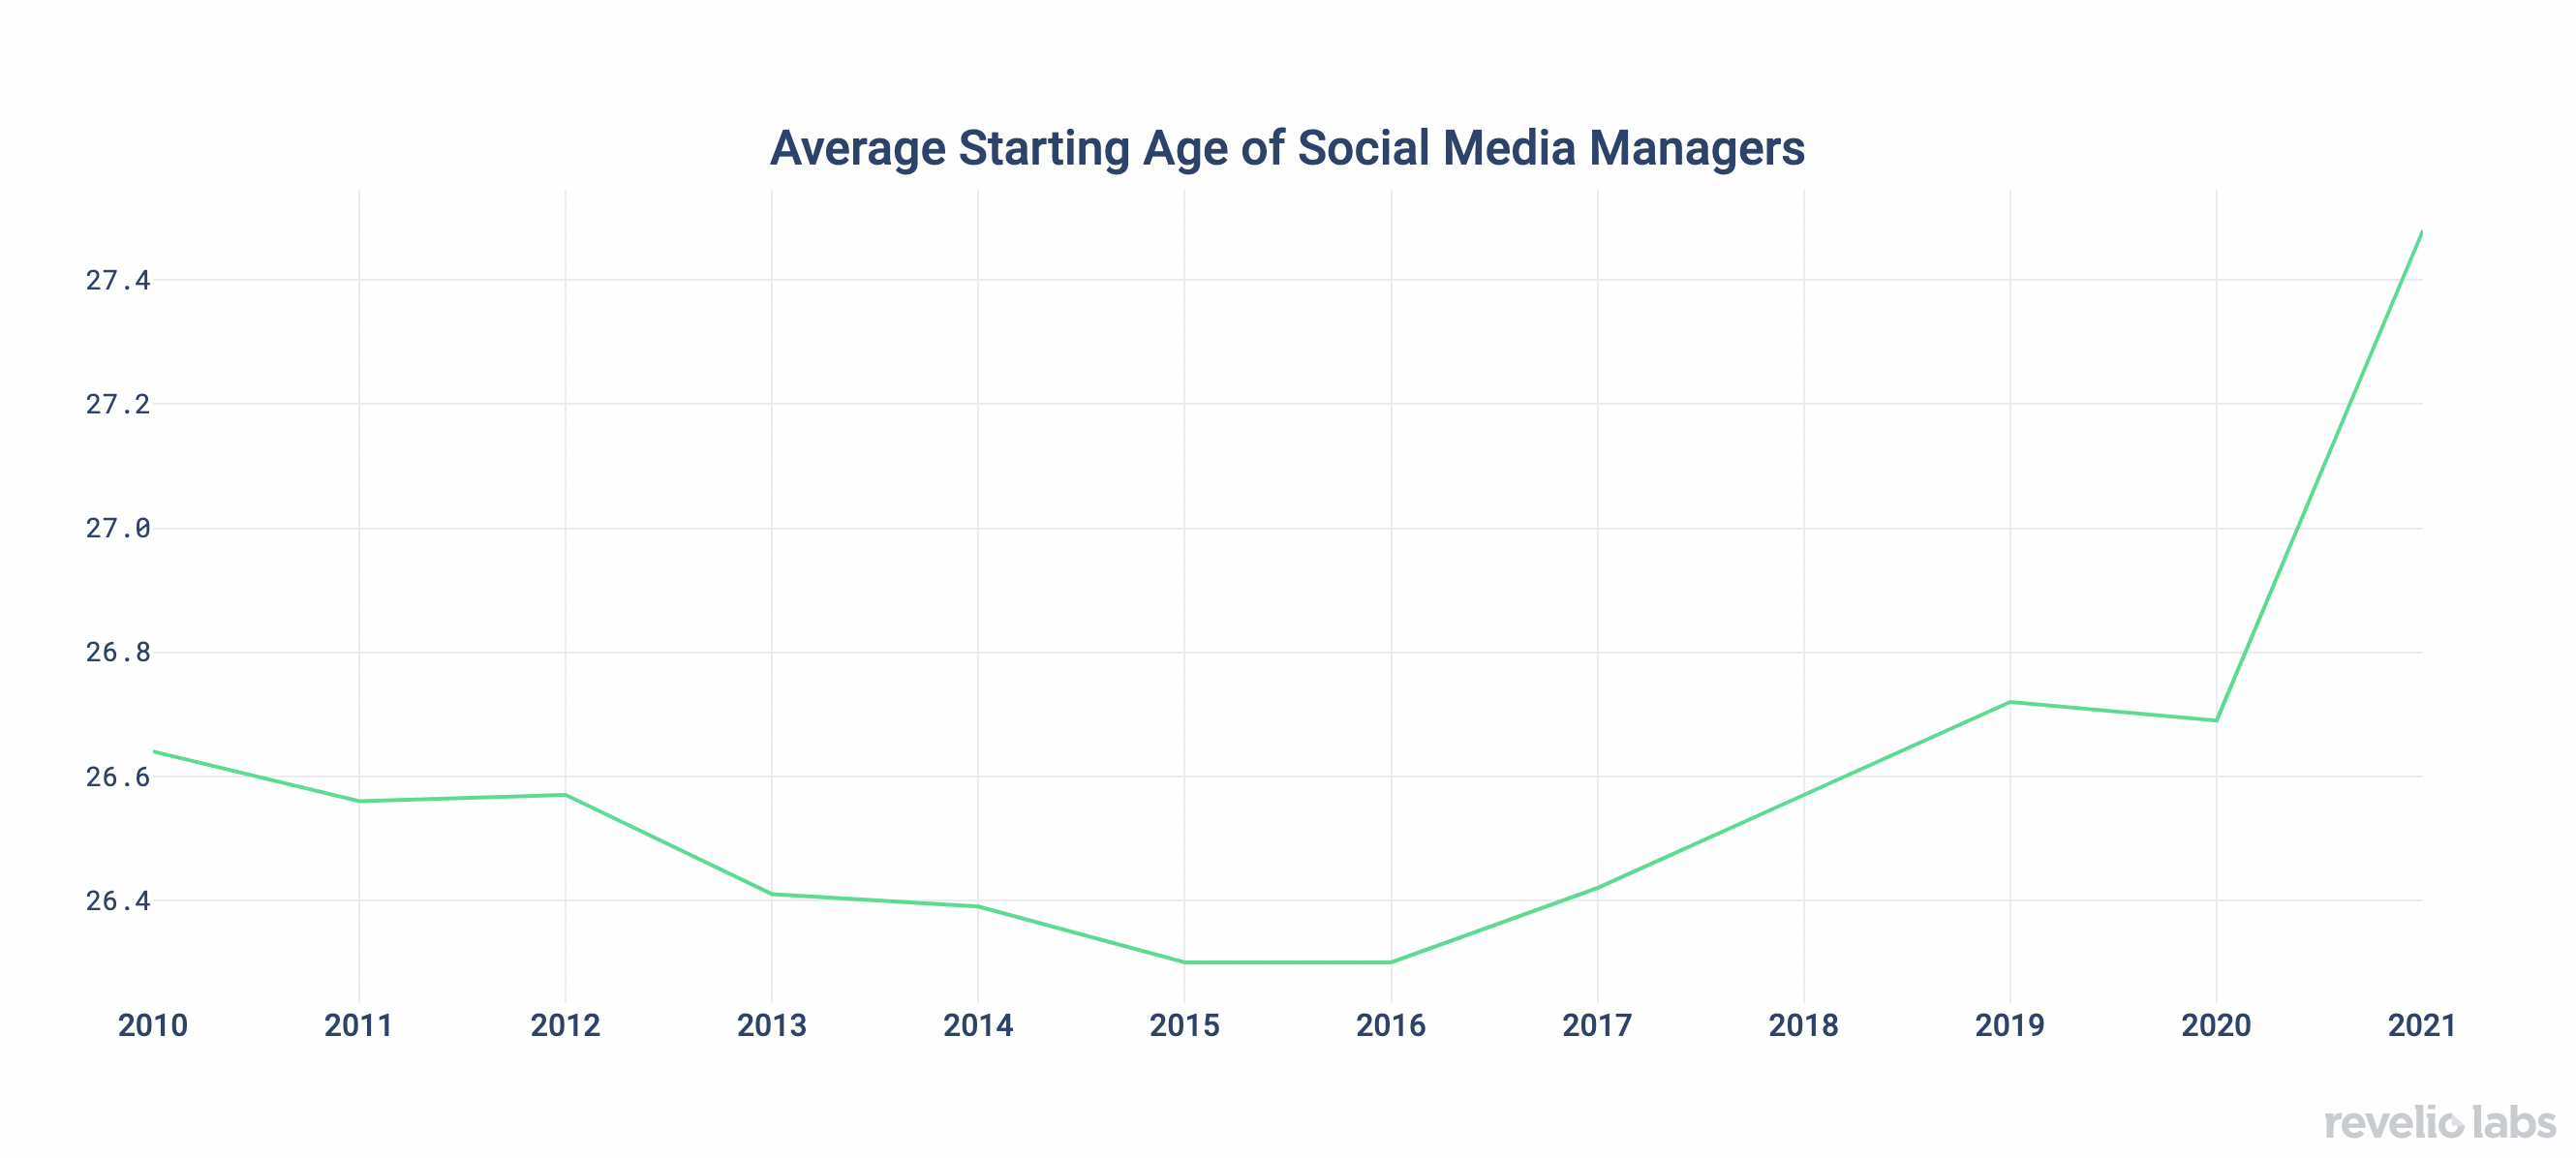 Average Starting Age of Social Media Managers